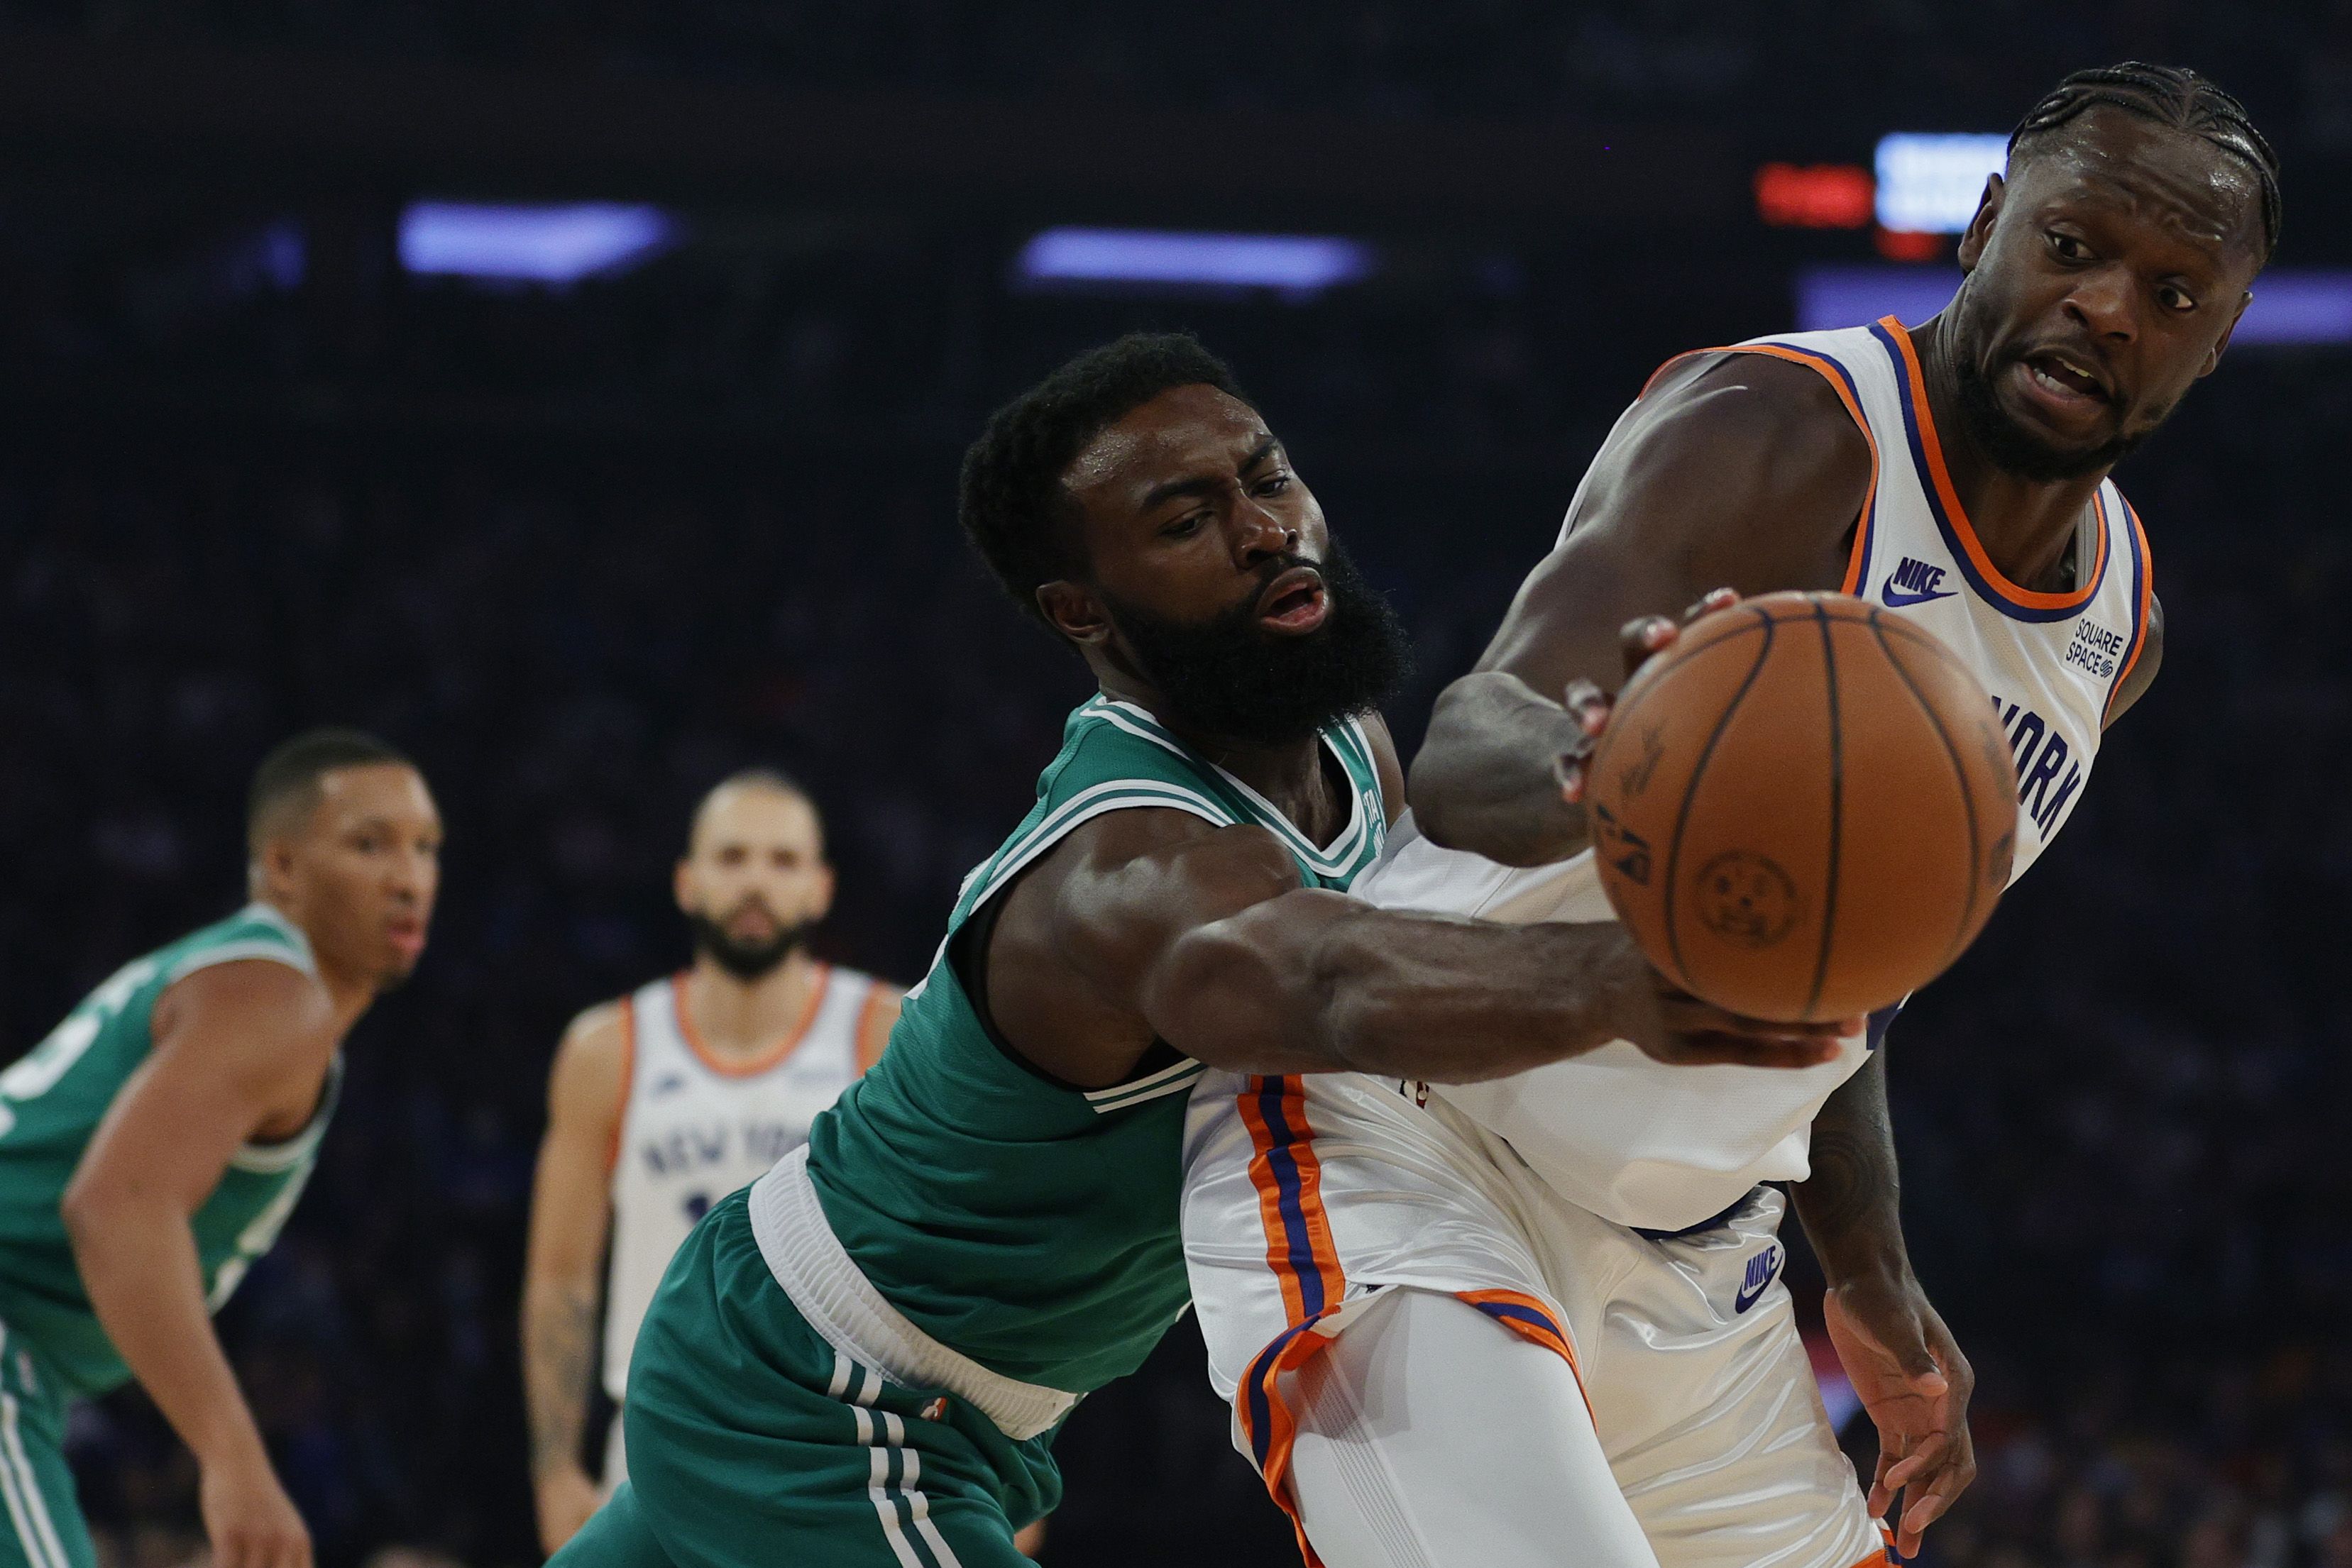 Knicks deliver statement with runaway win over Celtics